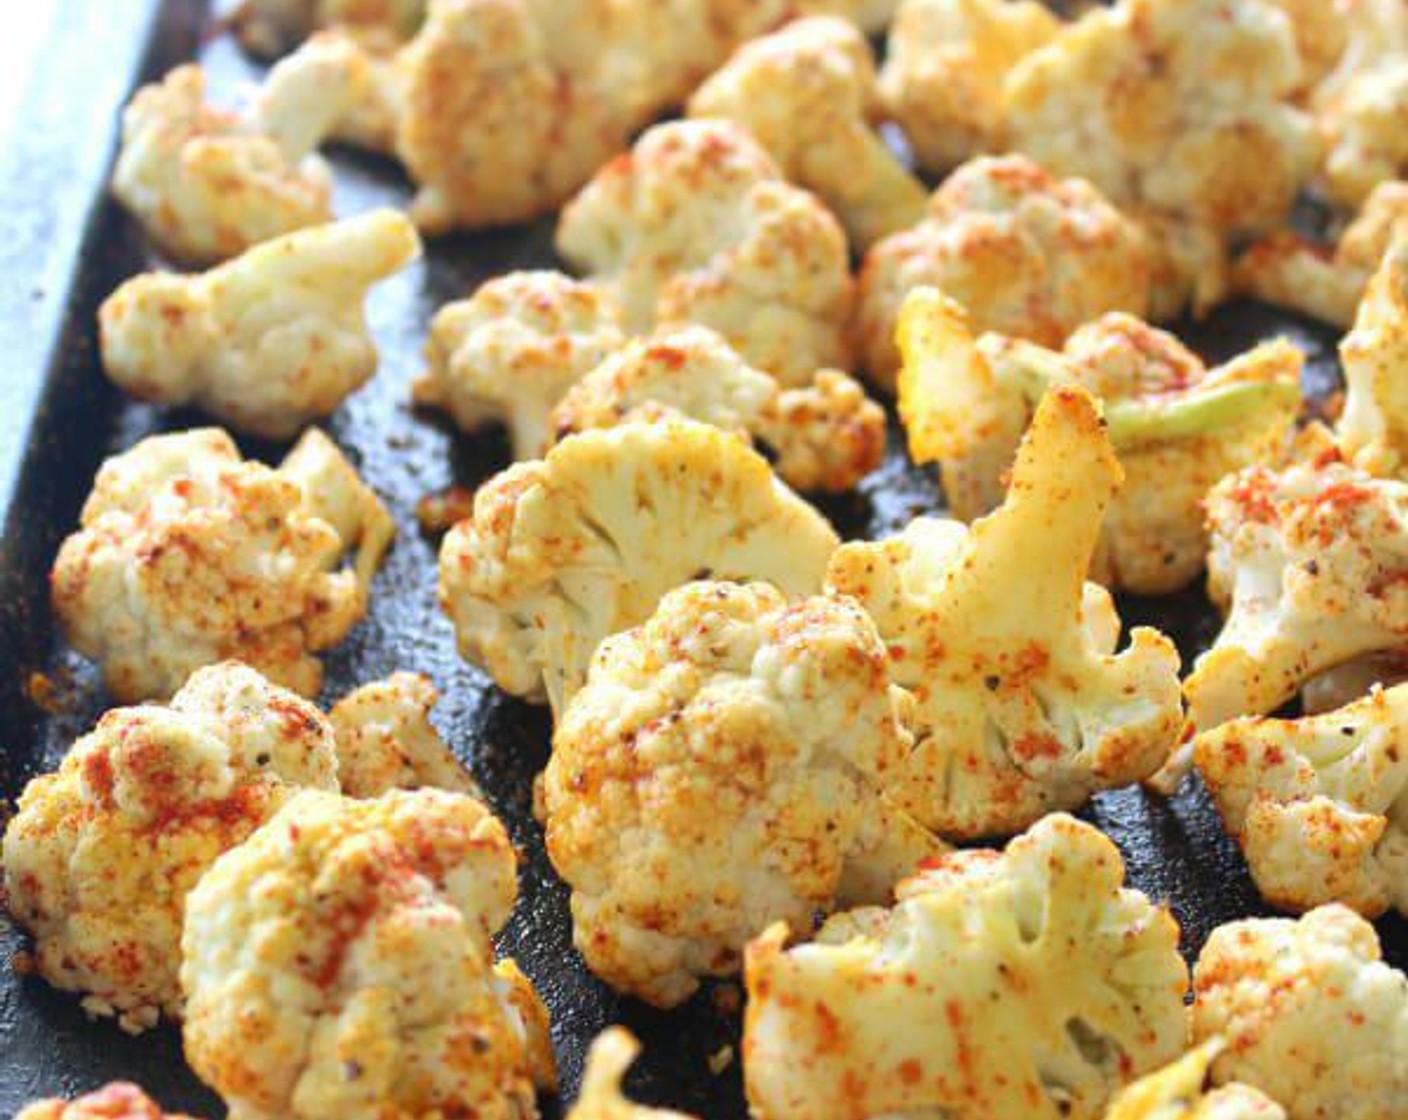 step 2 Place the Cauliflower (1 head) on a large baking tray. Drizzle with Olive Oil (3 Tbsp) and Sesame Oil (2 Tbsp). Sprinkle on the Ground Turmeric (1/2 Tbsp), Paprika (1/2 Tbsp), Ground Cumin (1/2 Tbsp), Salt (to taste), and Ground Black Pepper (to taste).